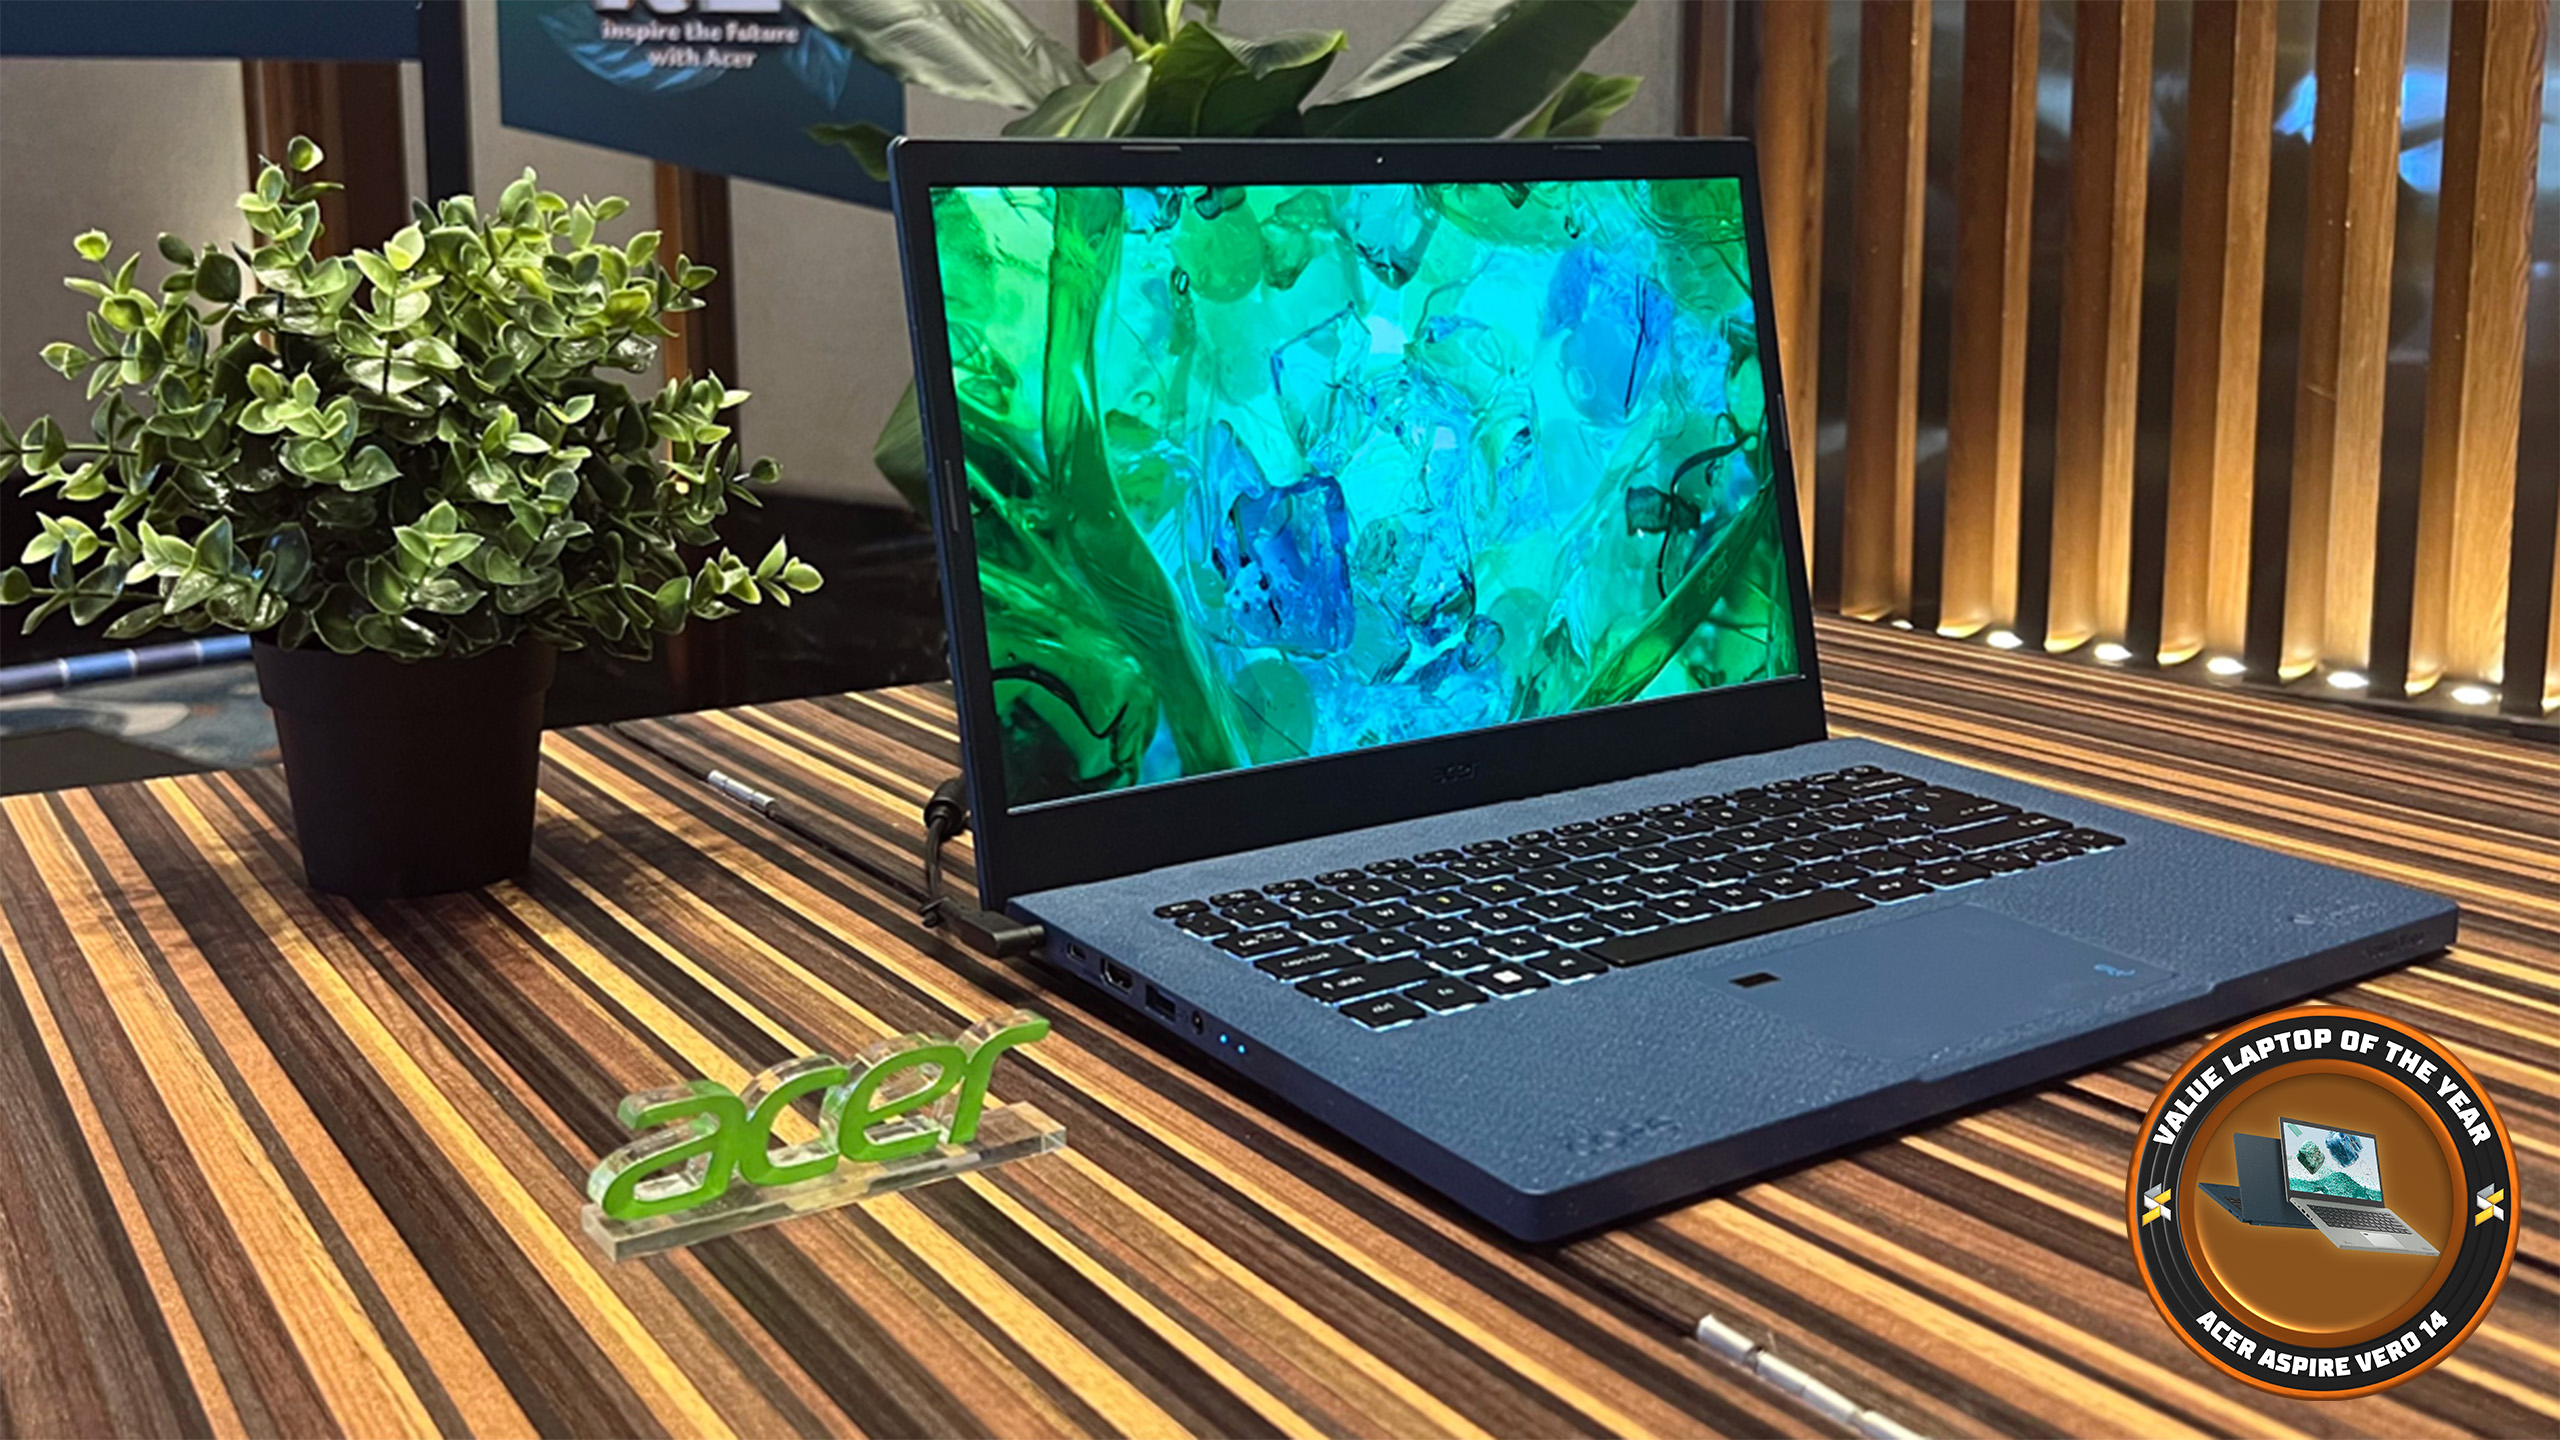 soyacincau awards 2023: the best laptops and gadgets this year